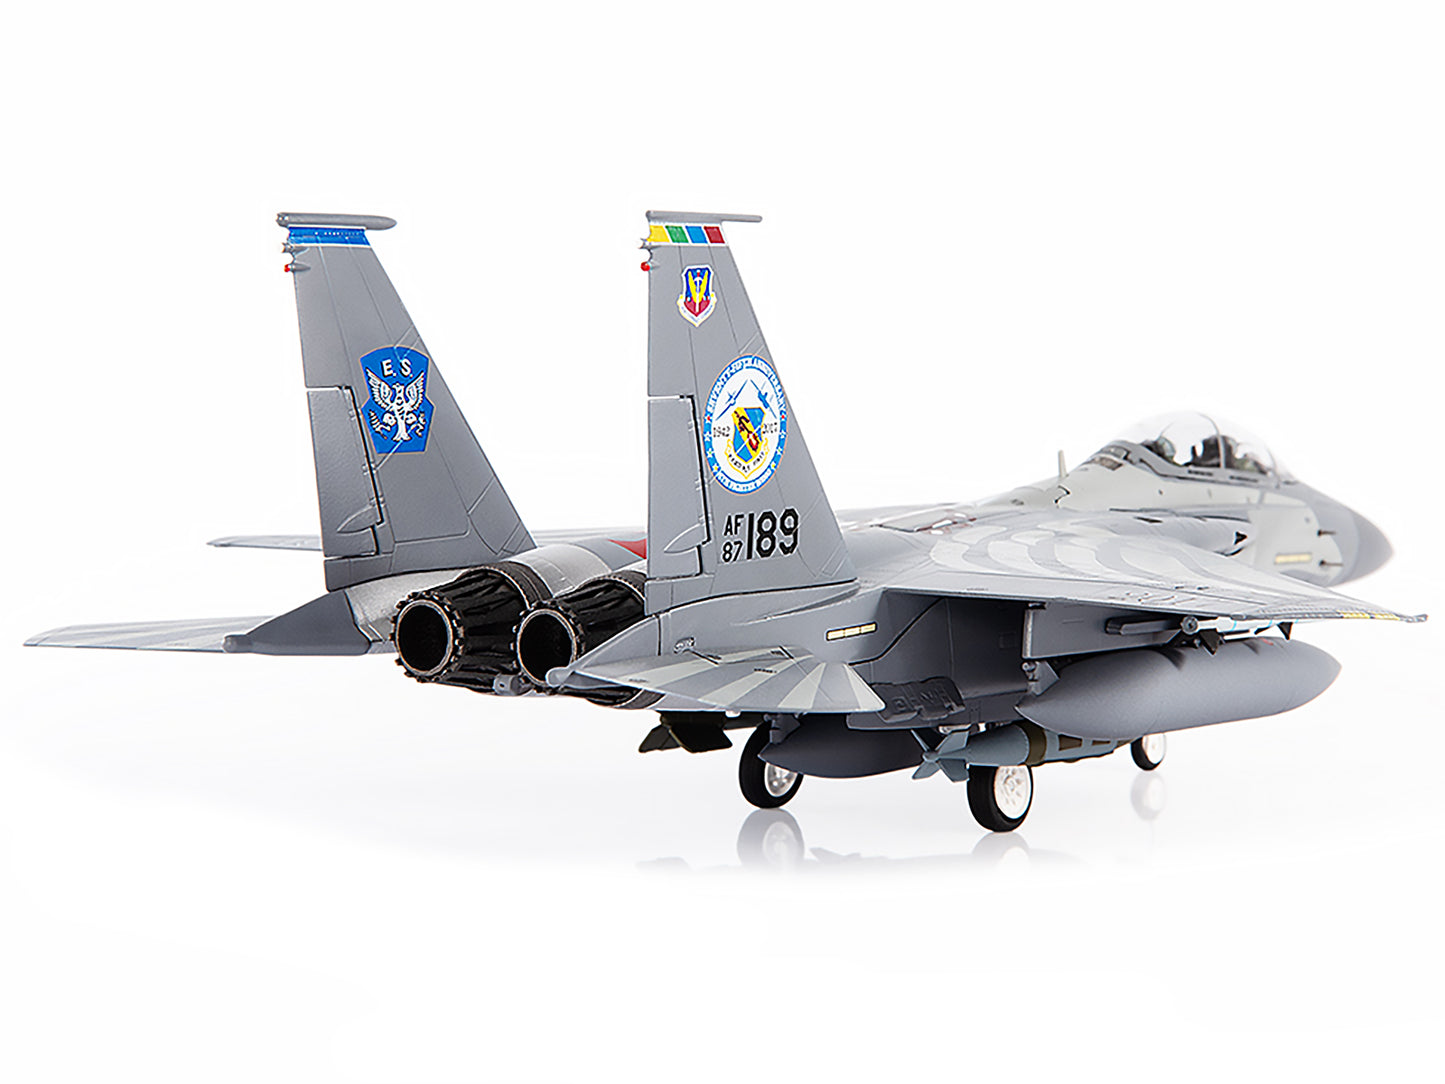 '-15e strike eagle 4th wing 2017 75th stand 700 1/72 diecast model